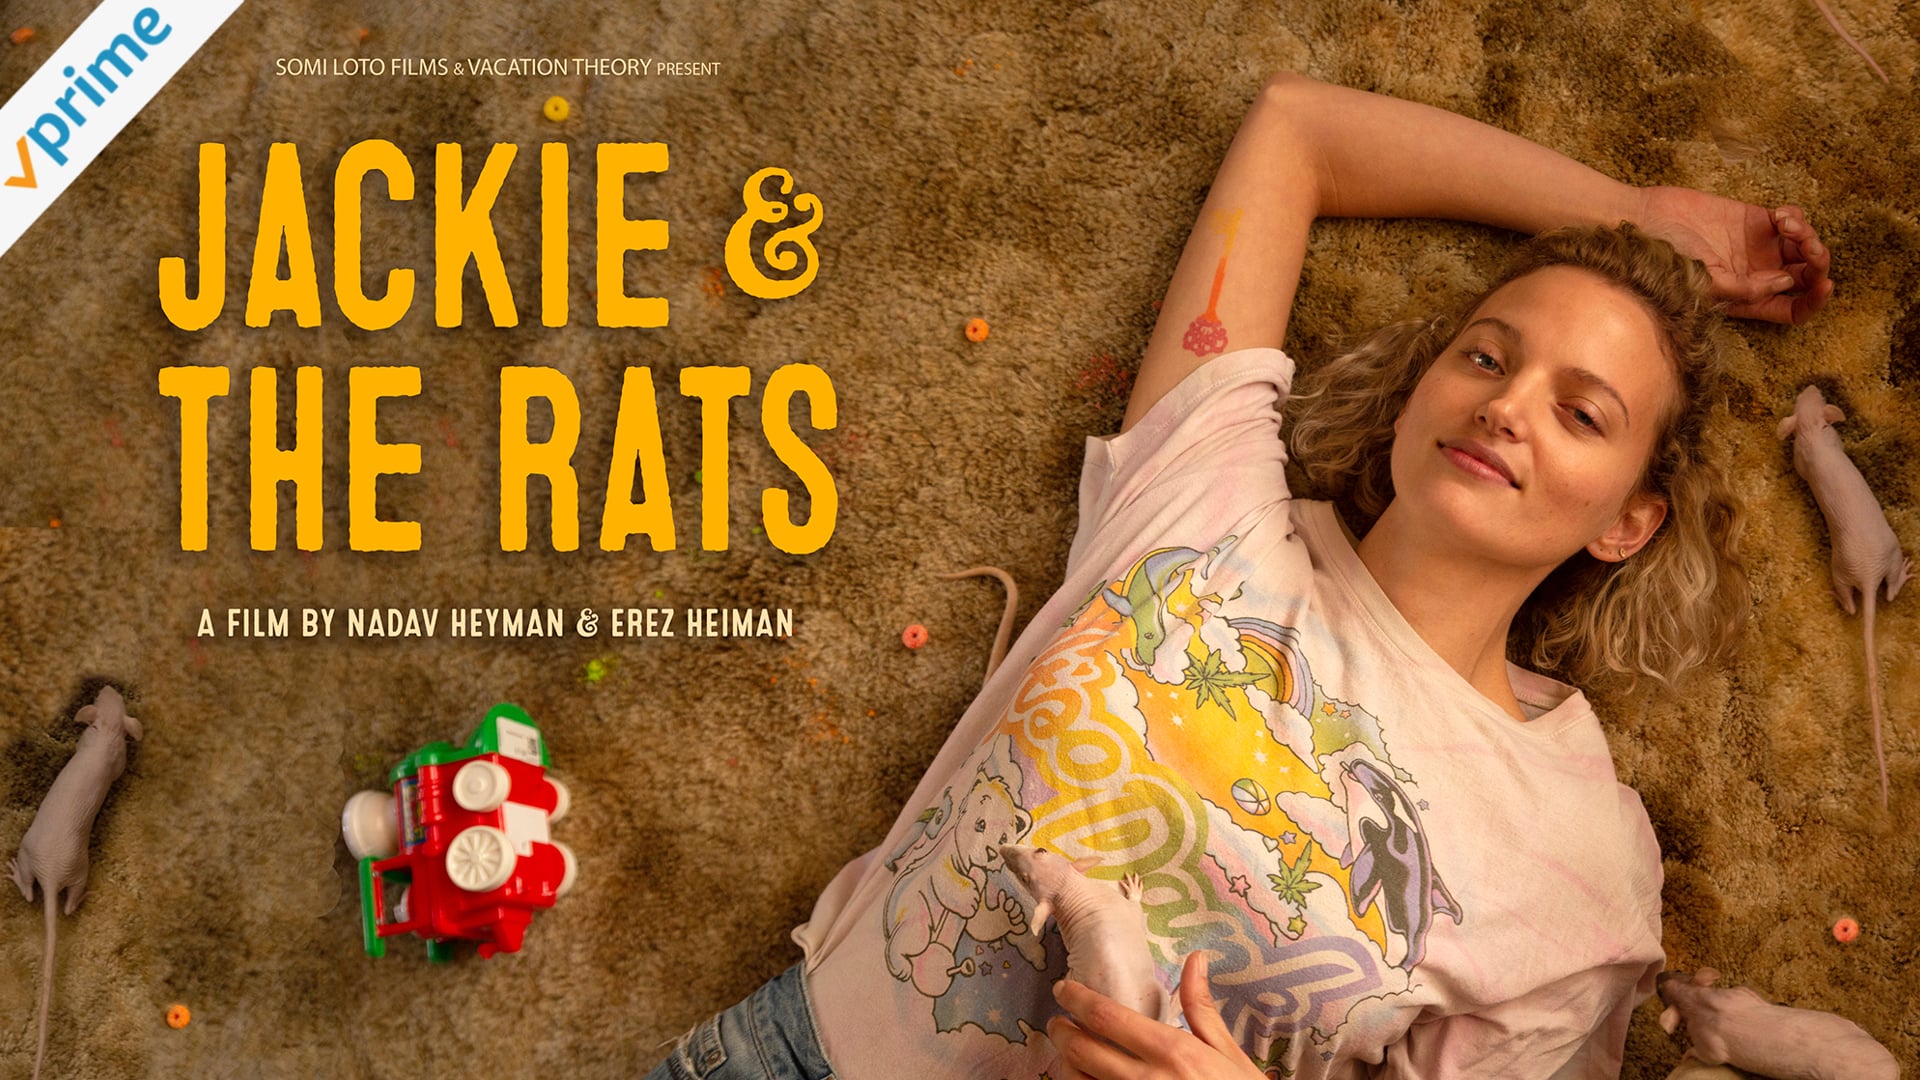 Jackie & The Rats - Trailer